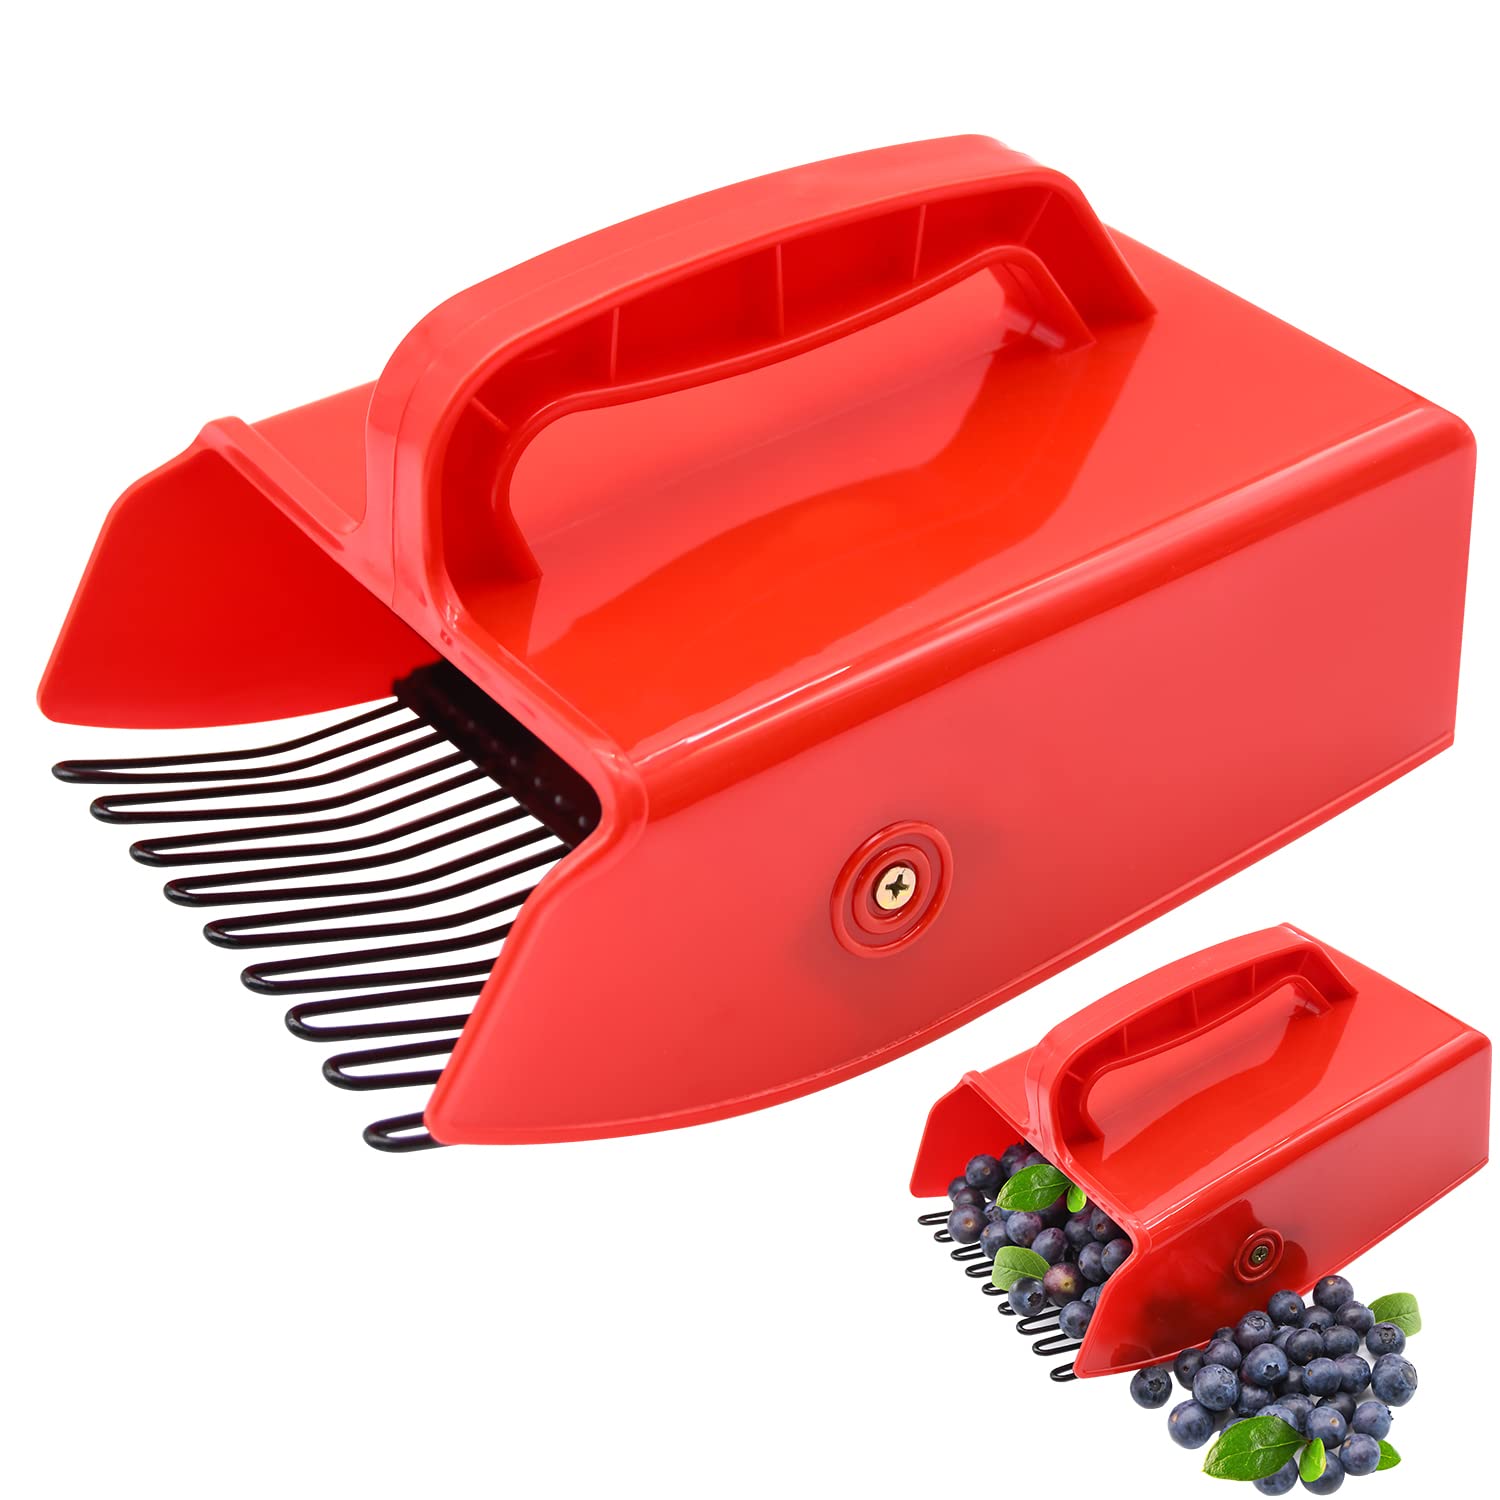 LFSEMINI Berry Picker, Berry Pickers and Rakes with Metallic Comb and Ergonomic Handle for Easier Berry Picking, Blueberry Rake Scoop for Blueberries, Lingonberries and Huckleberries